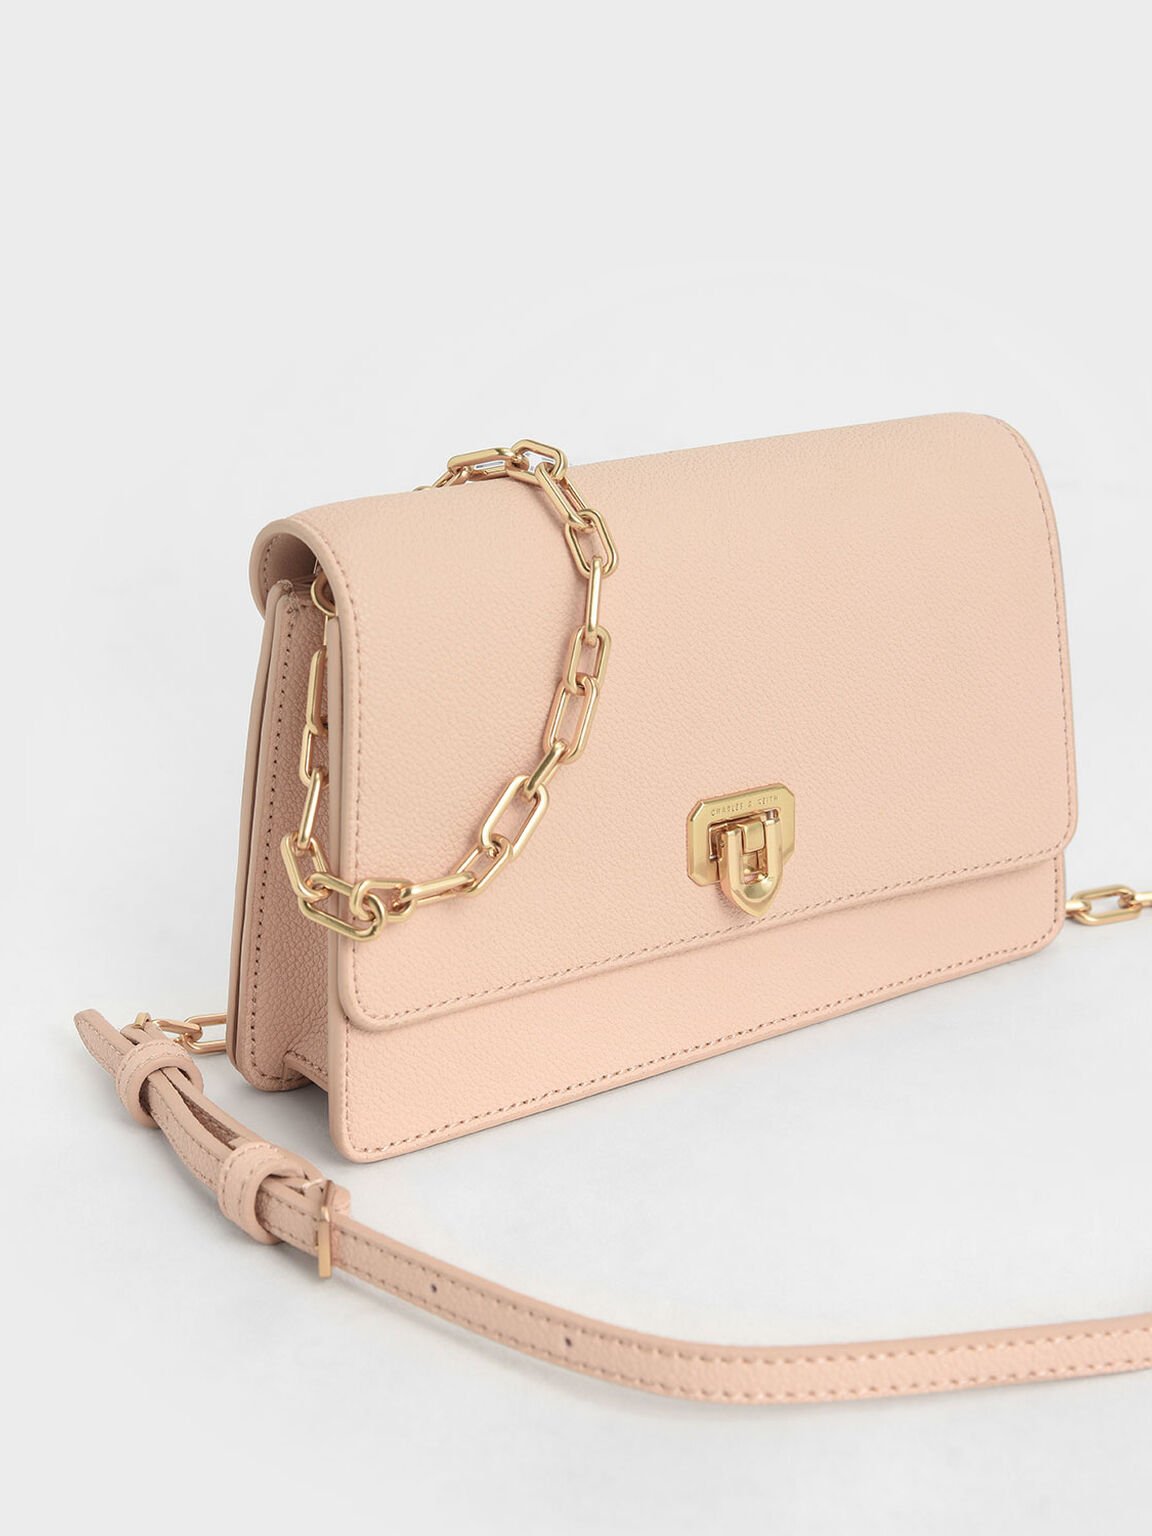 Double Chain Link Push-Lock Bag, Nude, hi-res